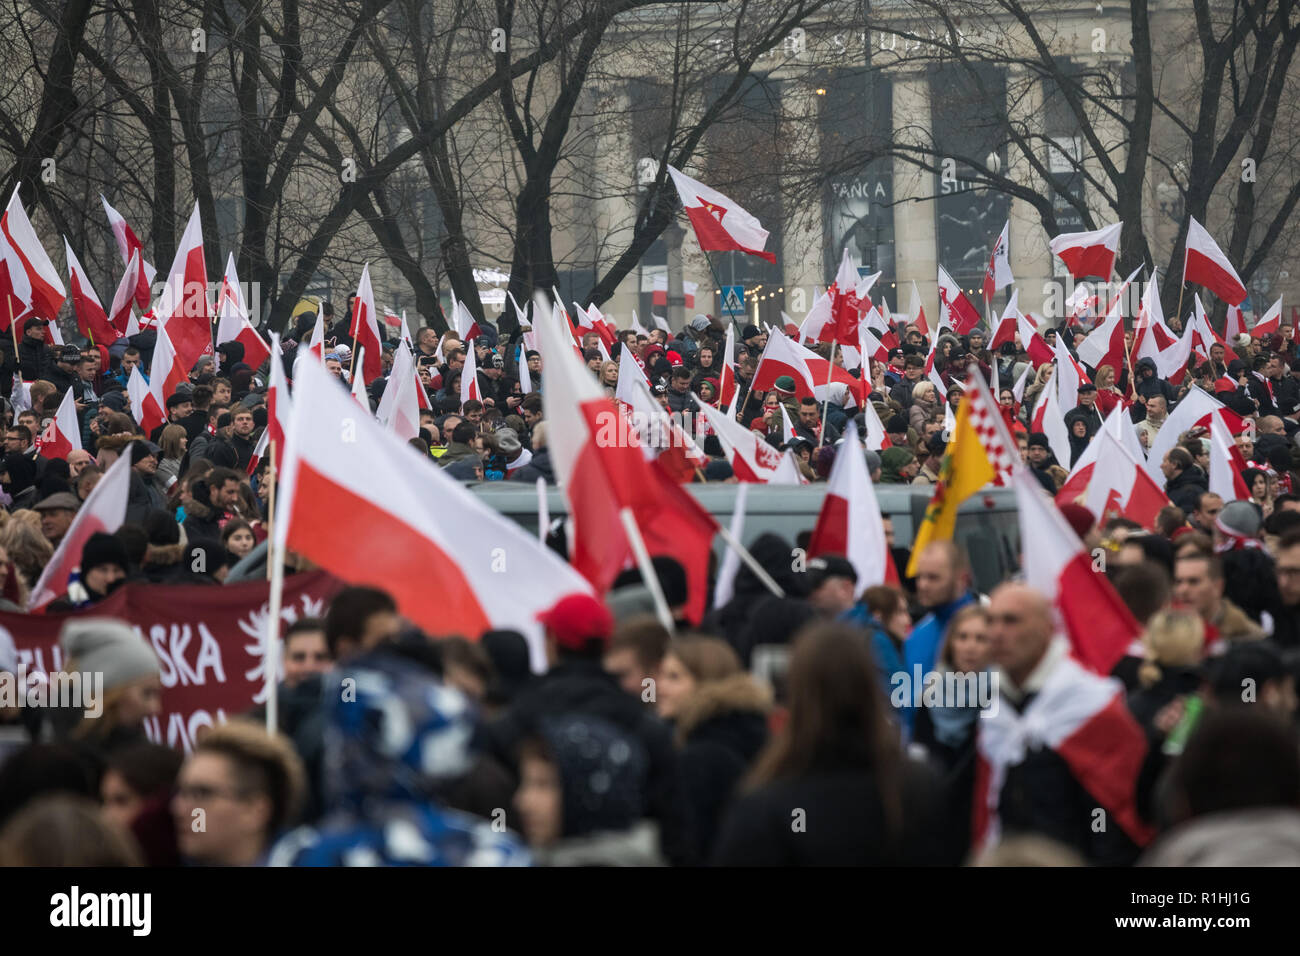 Tens of thousands join the 100th anniversary March of Independence organised by Poland's nationalists. Stock Photo